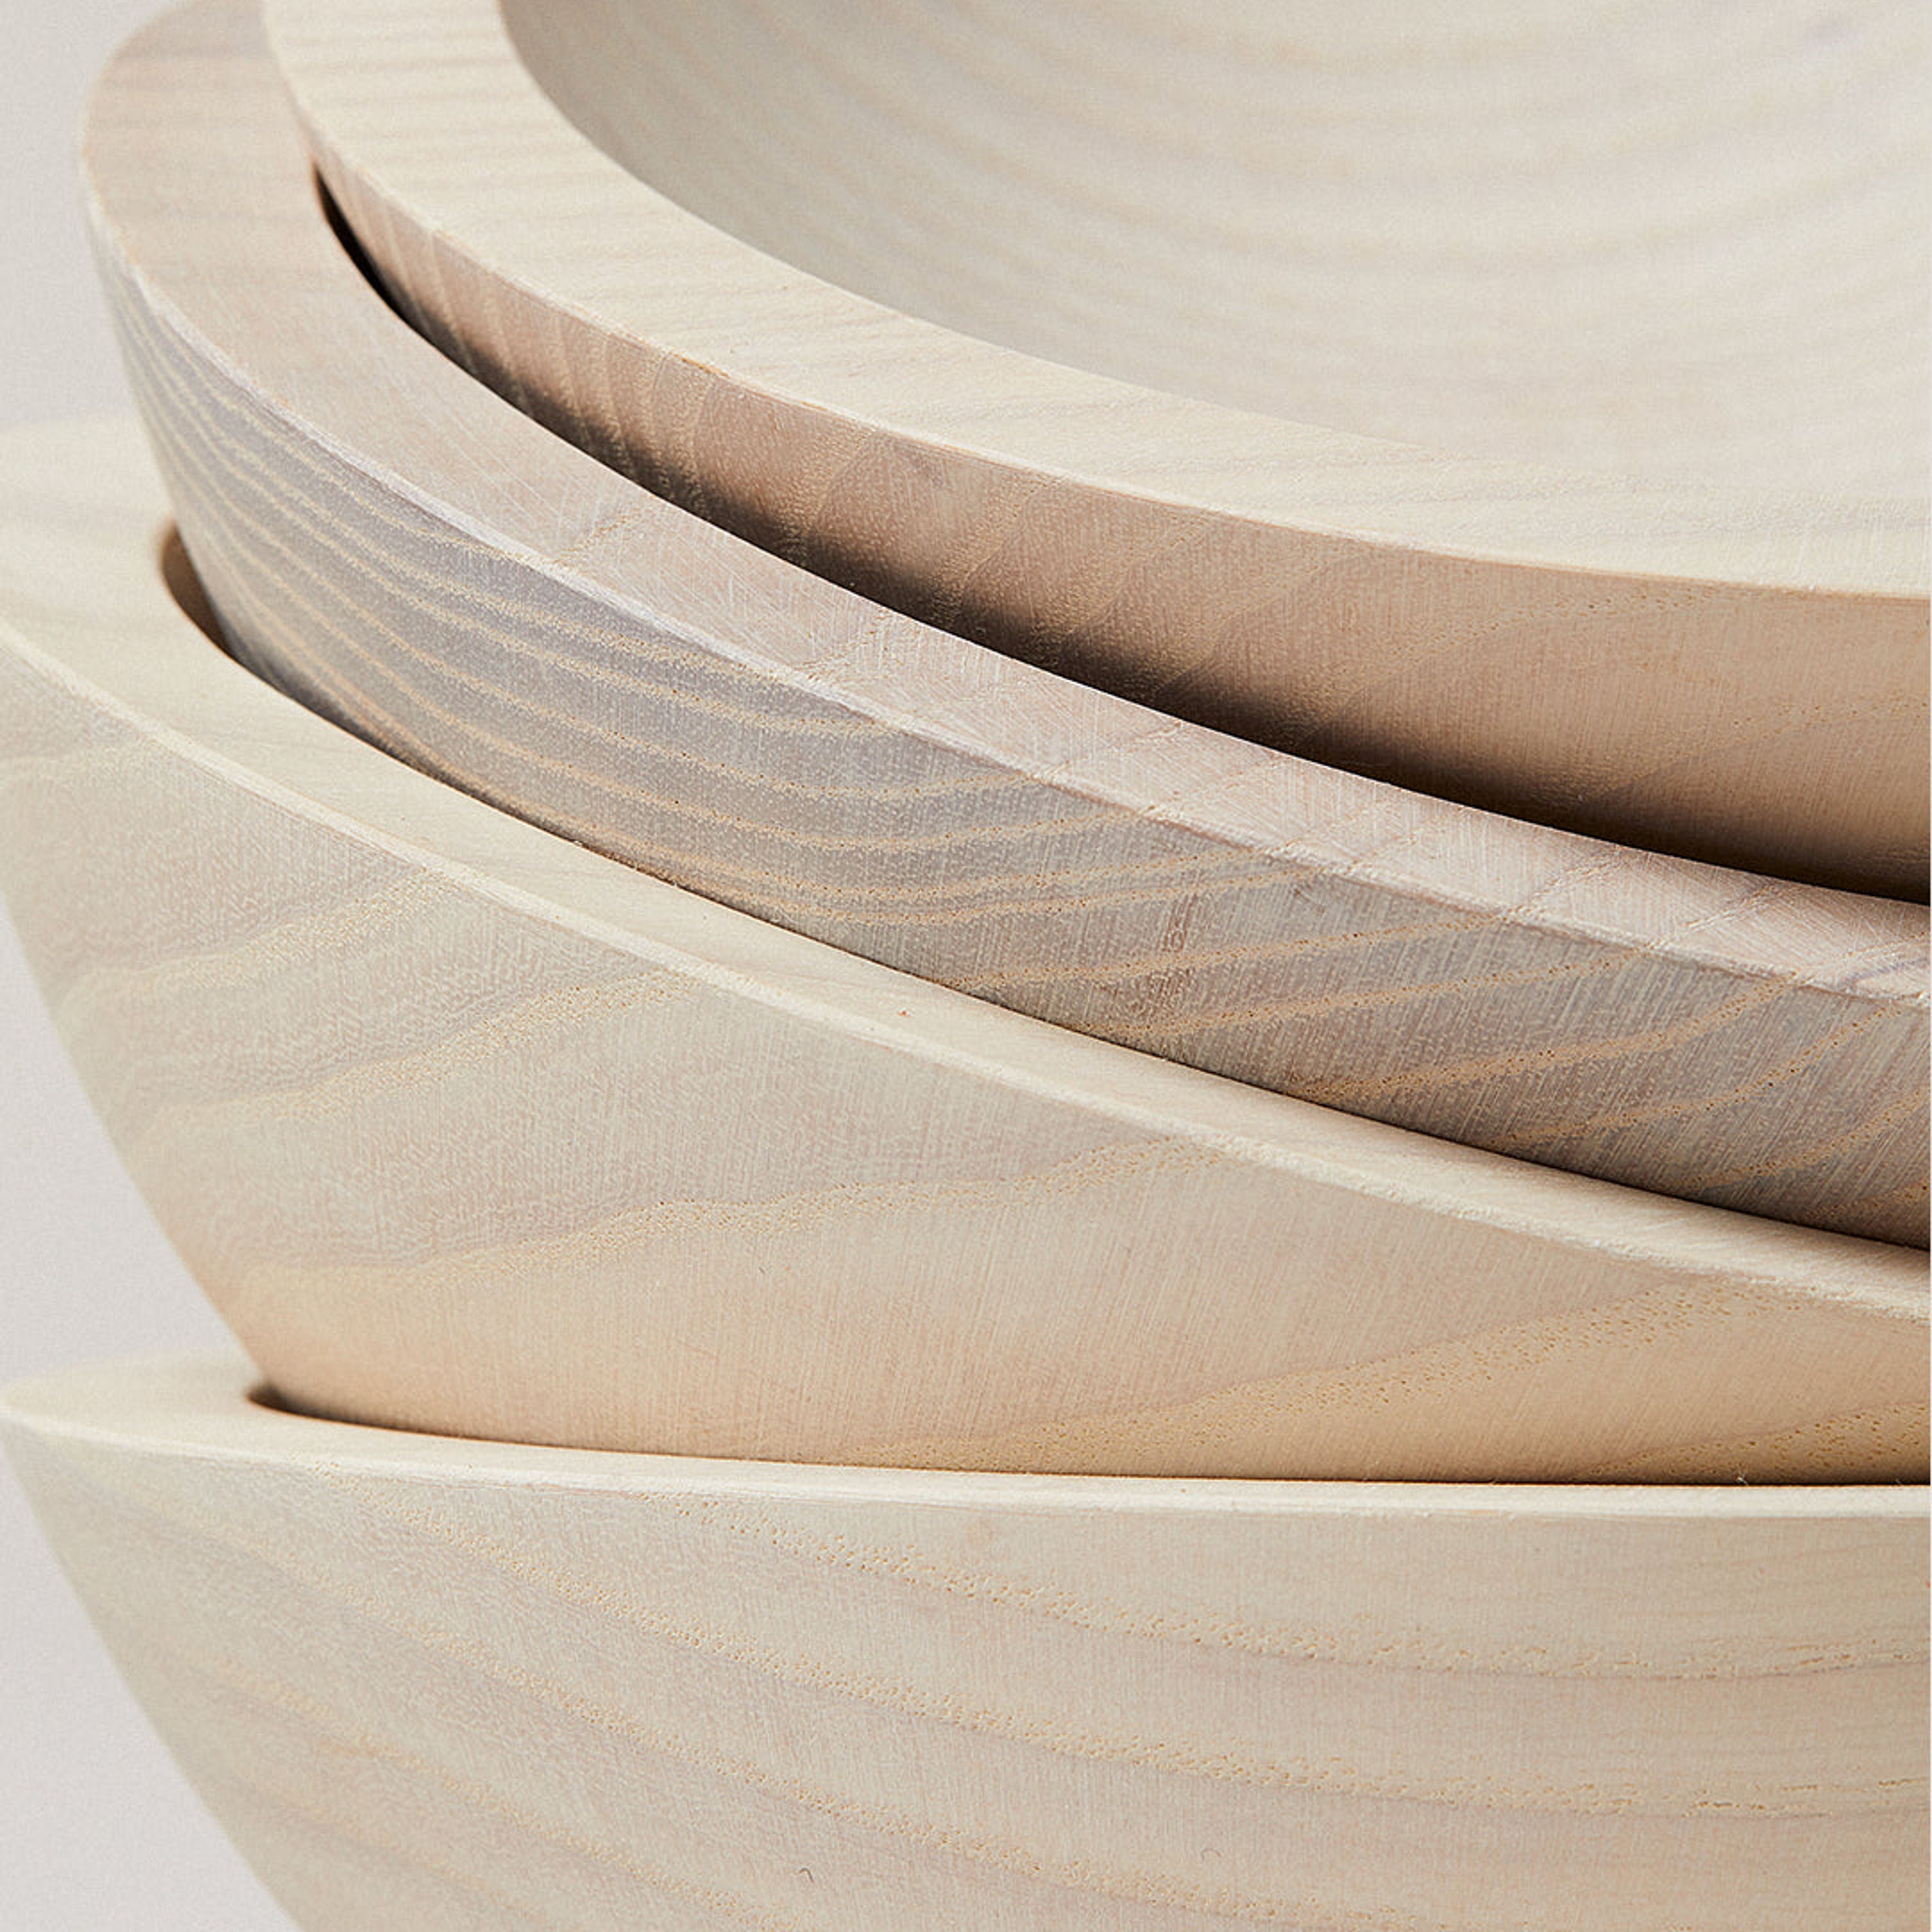 Set of 4 Crafted Wooden Bowls